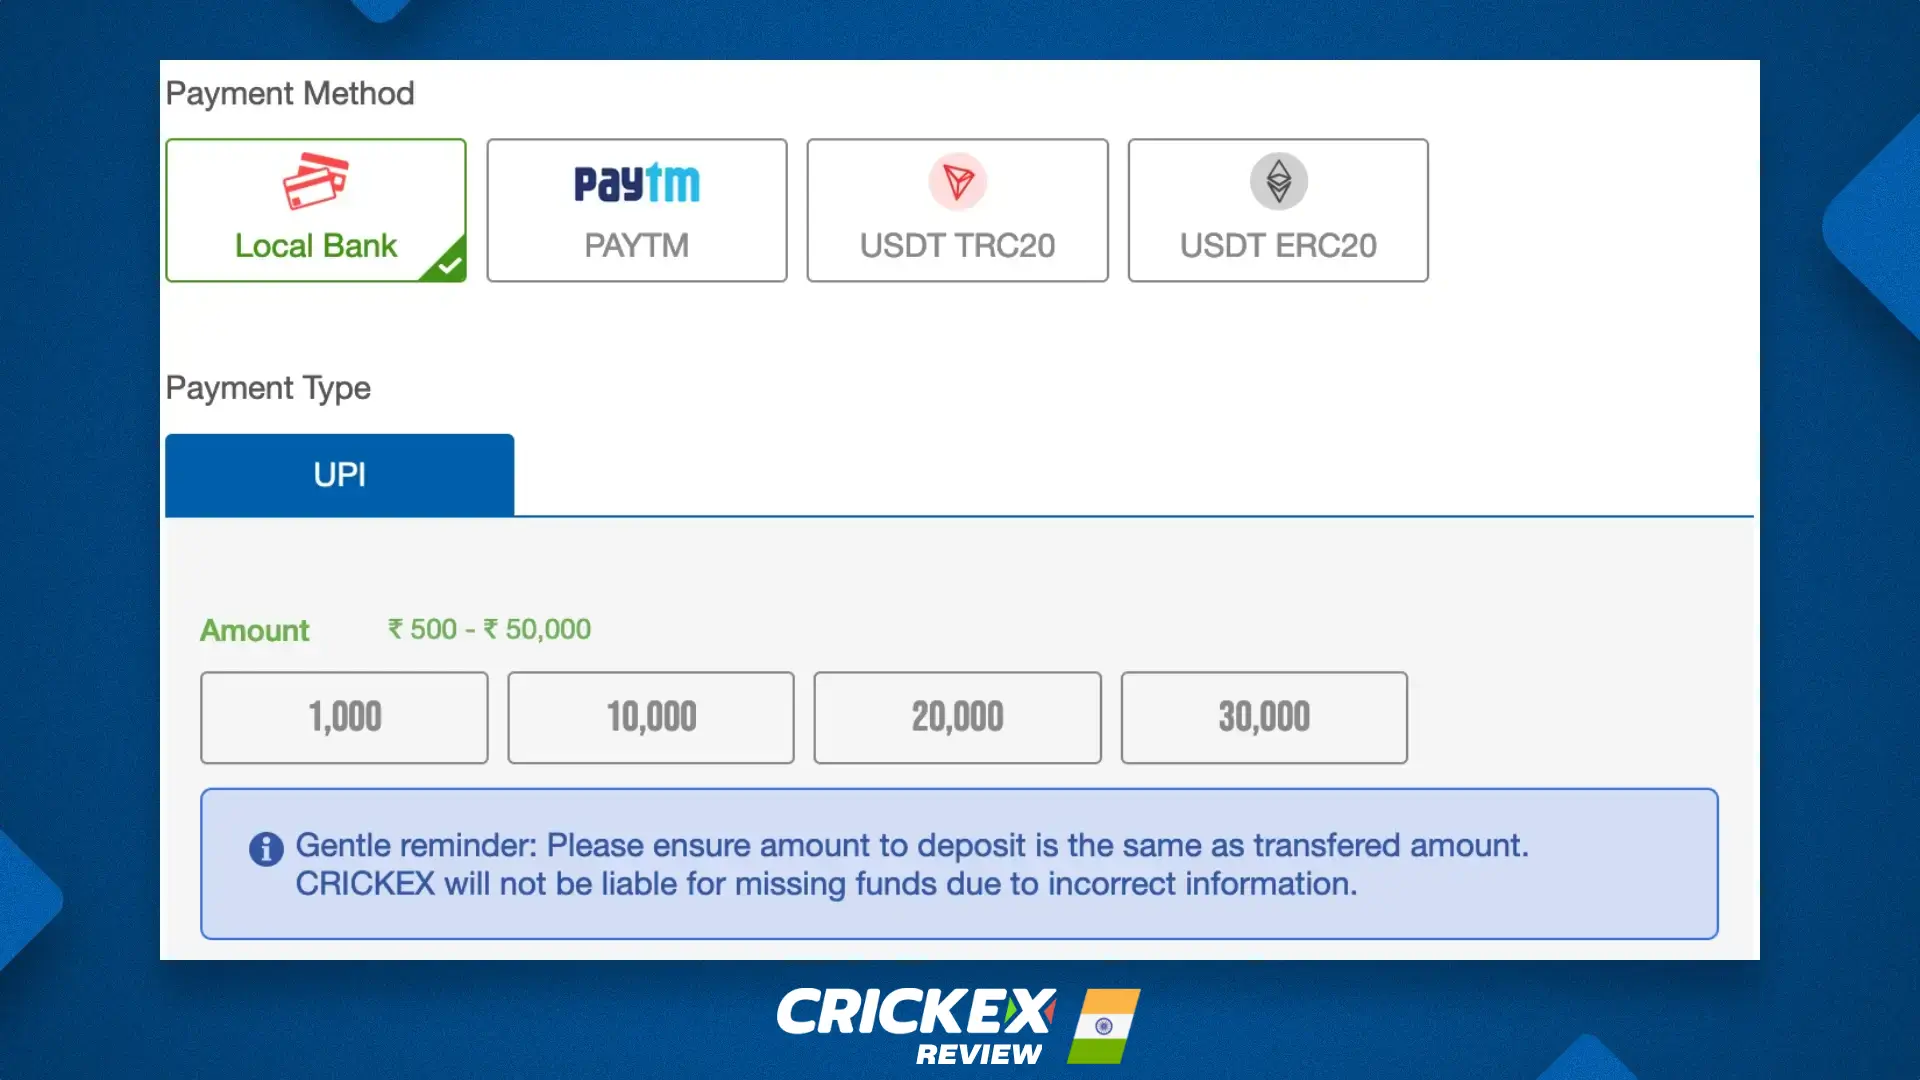 Payment systems available for depositing at Crickex